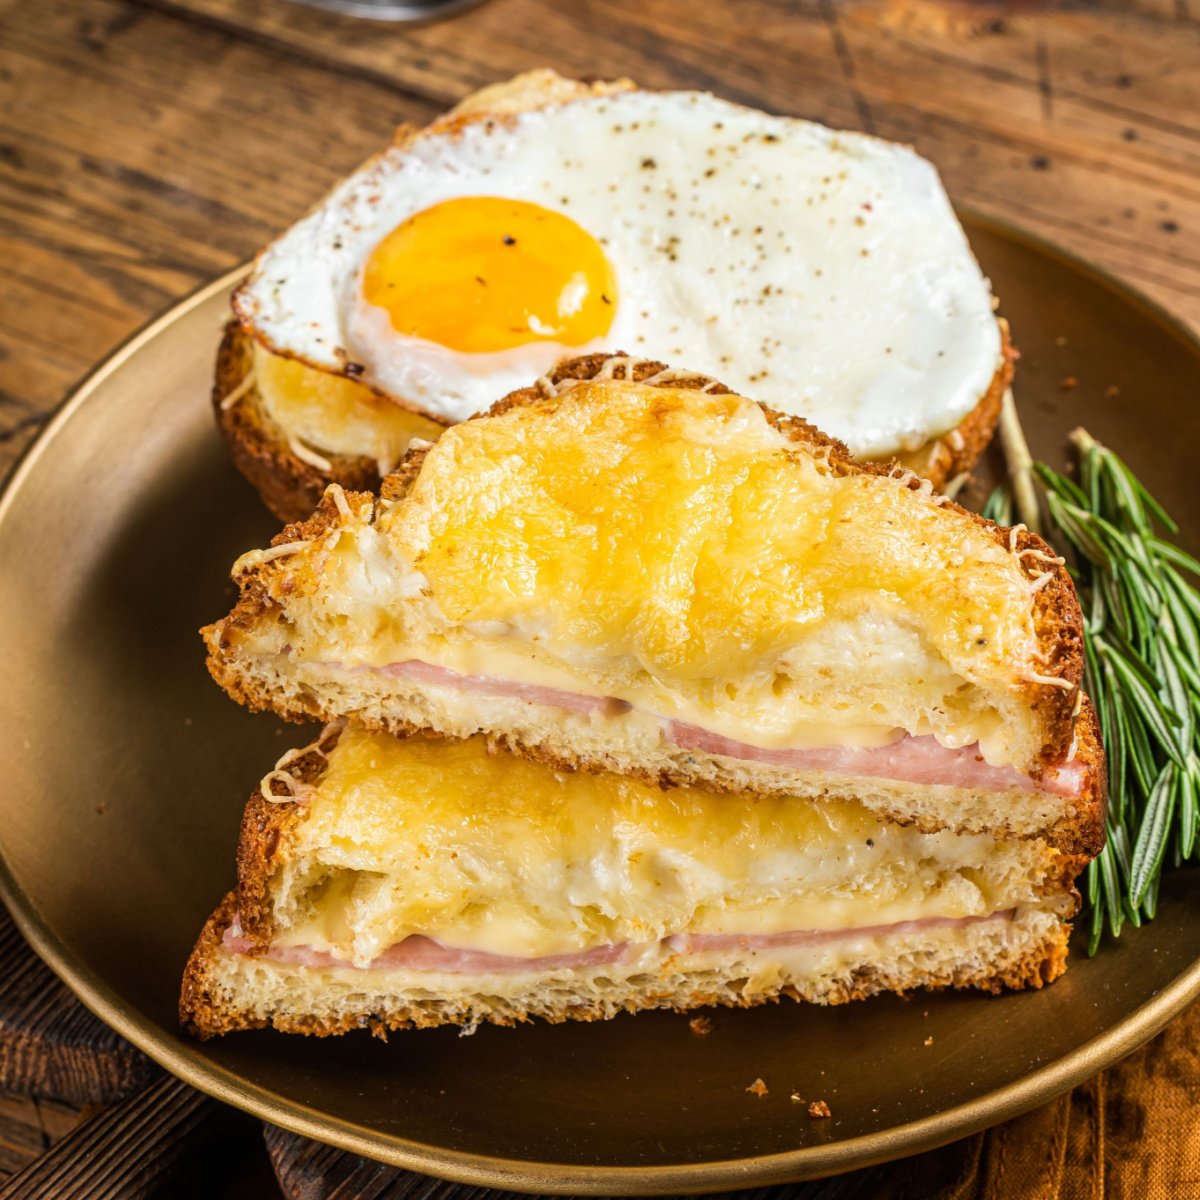 croque monsieur and croque madam in one plate